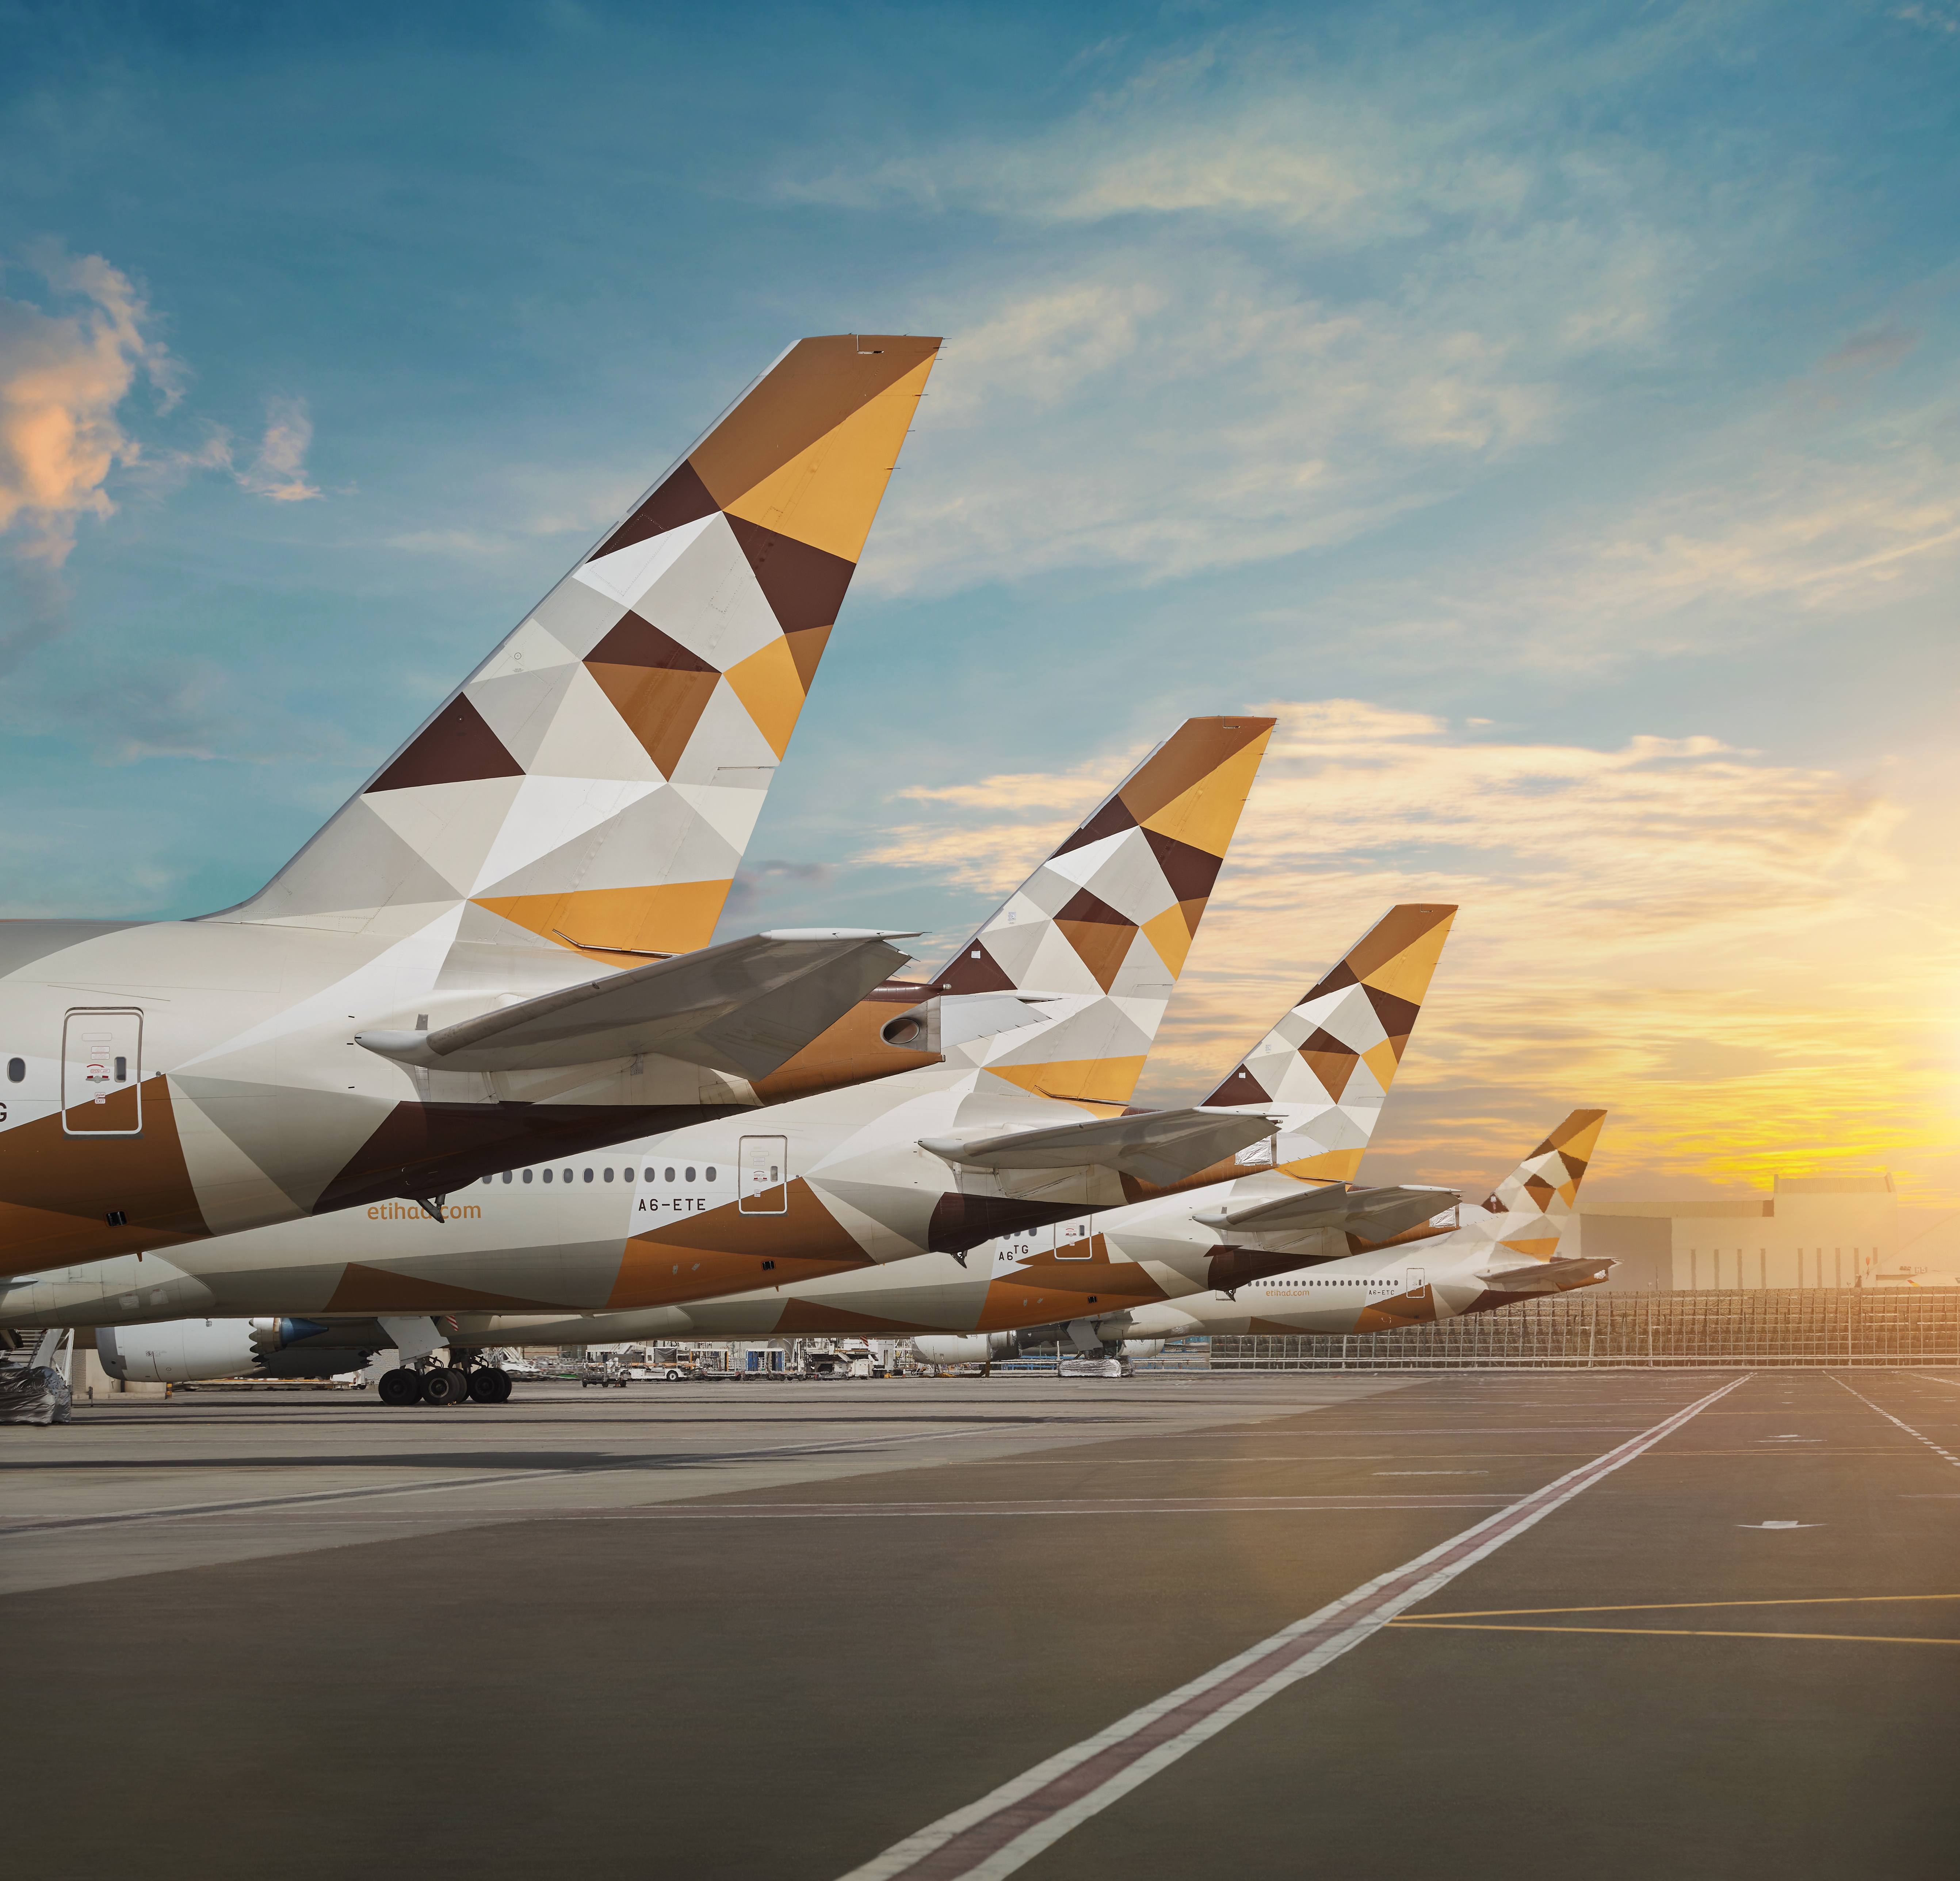 New Video Showcases Etihad’s Fleet Maintenance Drive During Covid-19 Downtime